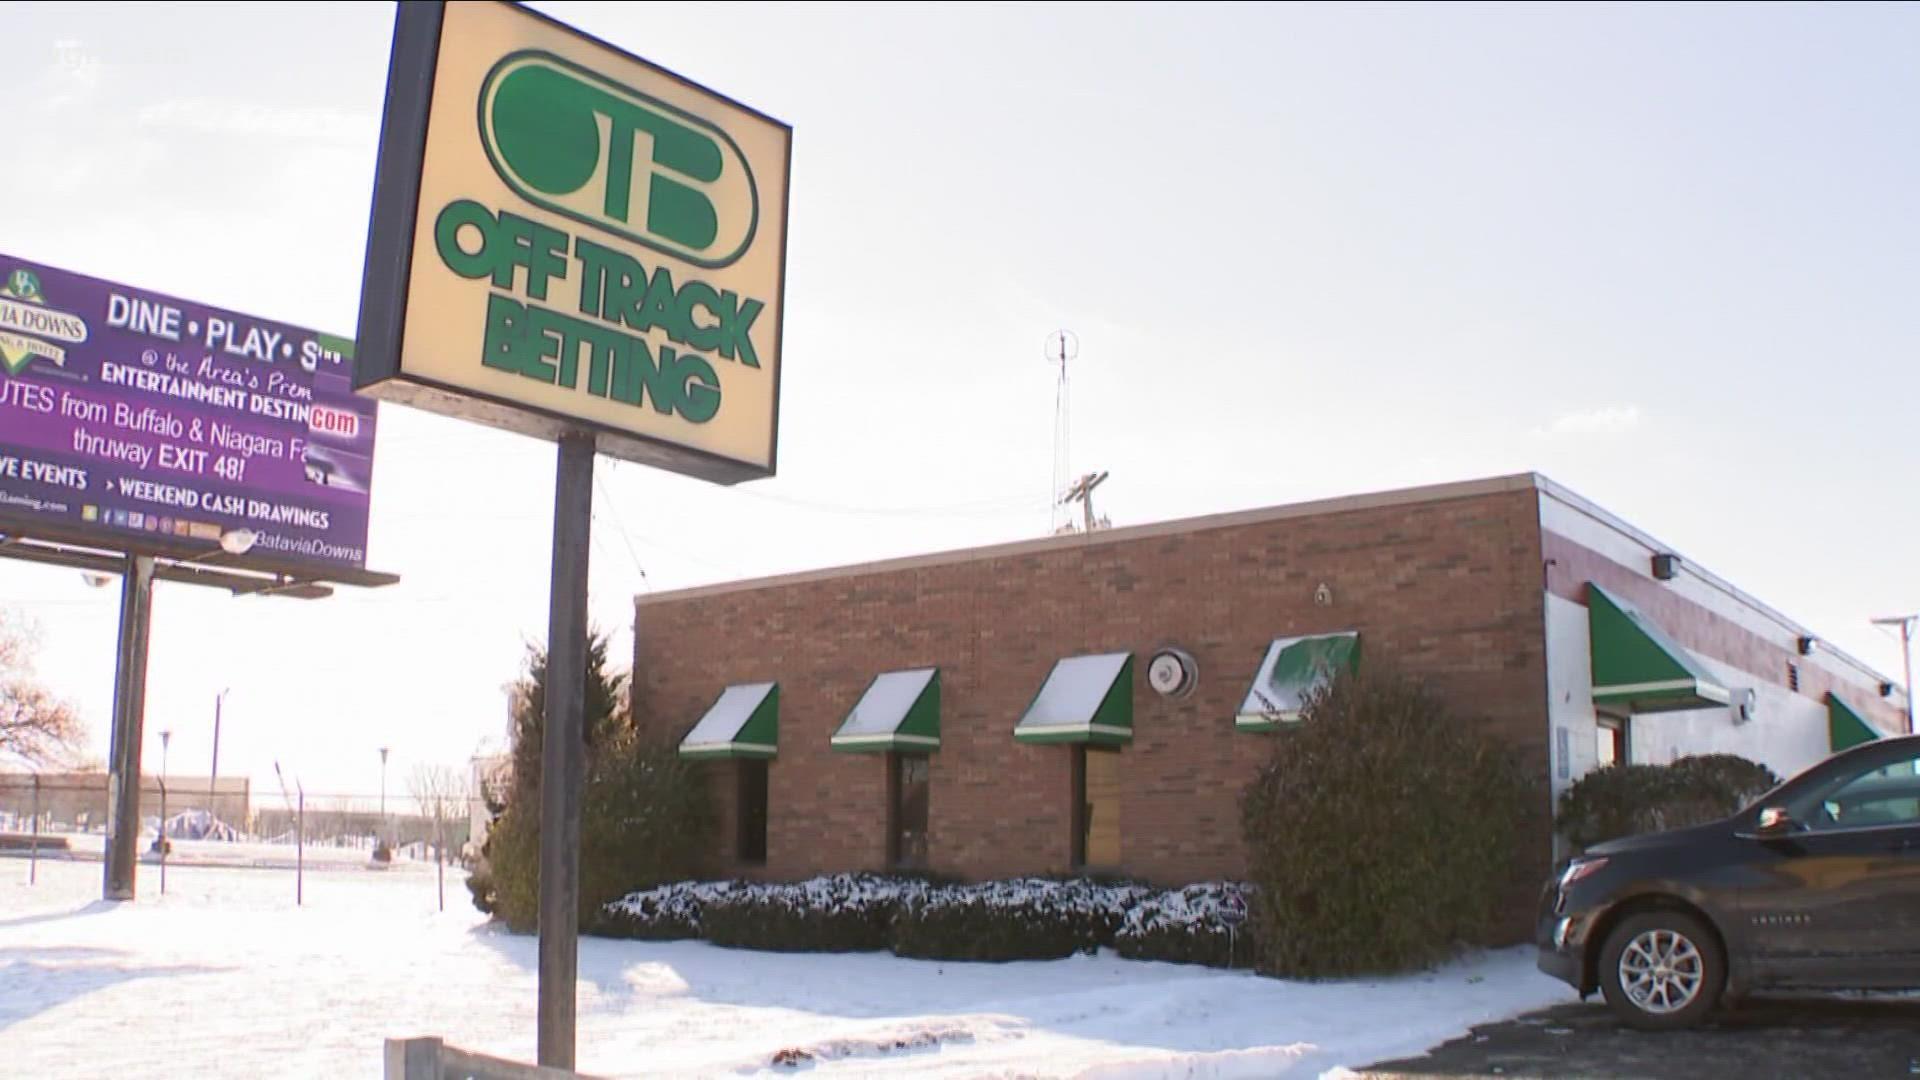 A lawsuit claims OTB has misused funds for the benefit of its executives and board members.